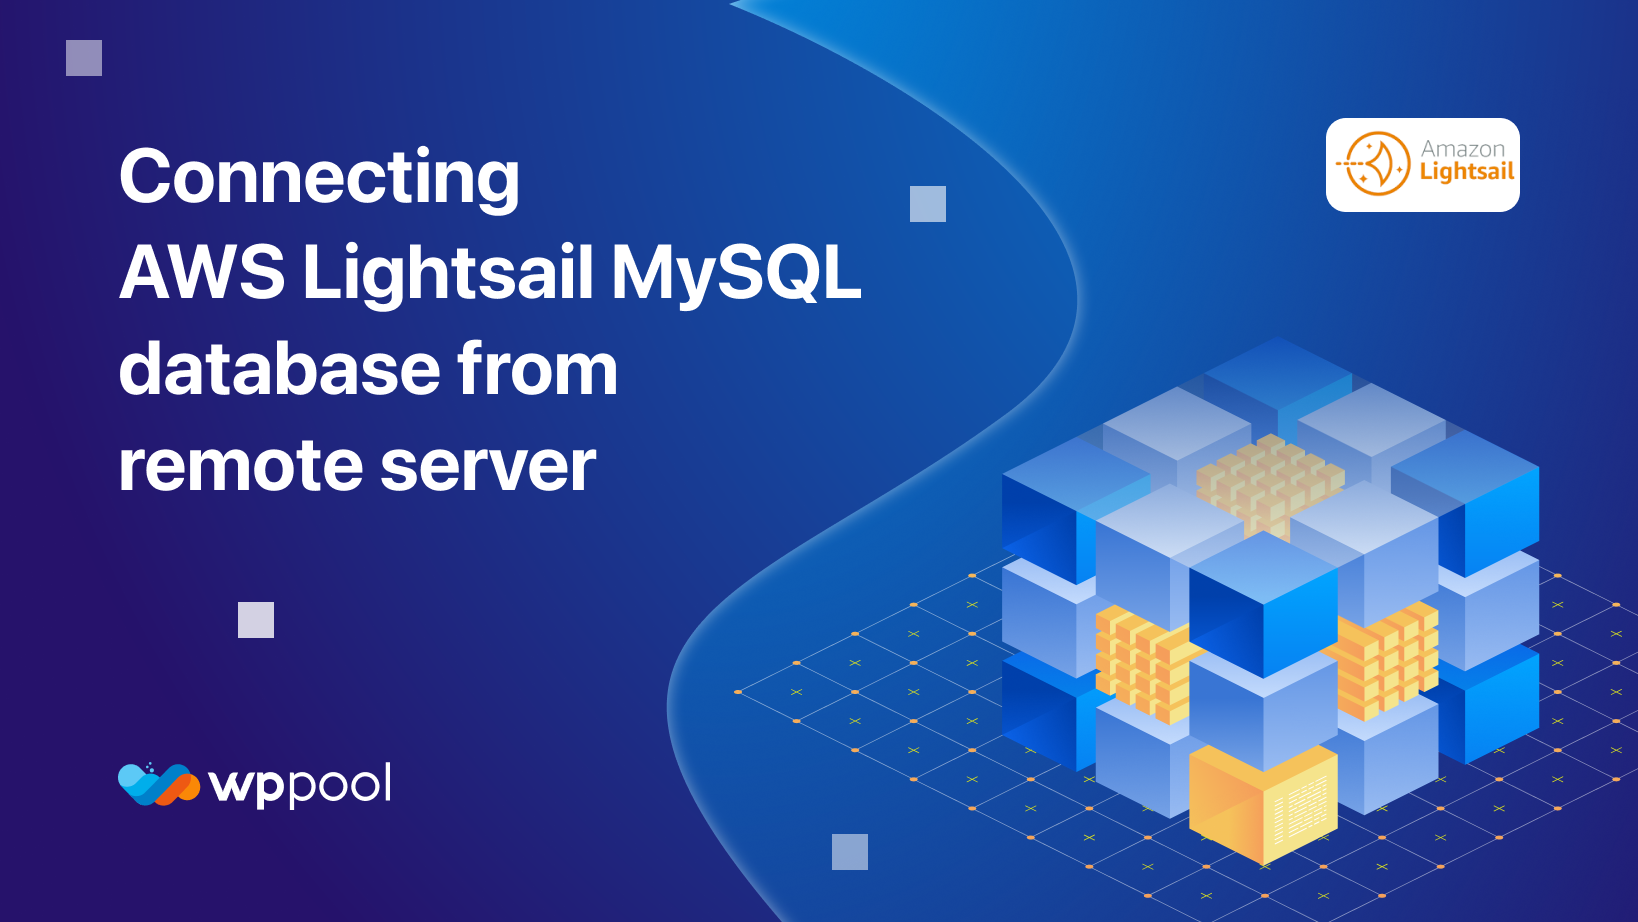 4 Easy Steps to Connect AWS Lightsail MySQL Remotely